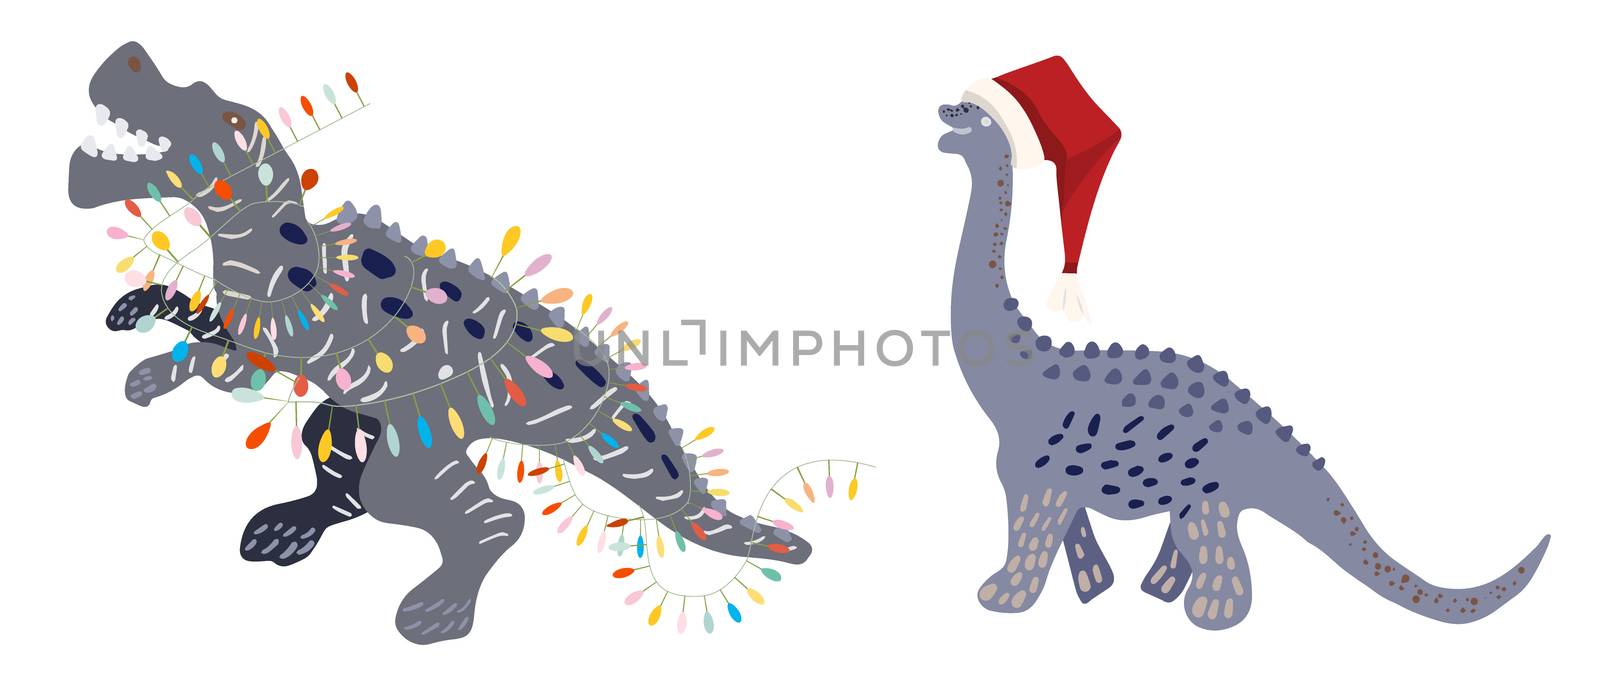 Christmas Dinosaur with festive lights and red Santa hat isolated on white background. Merry Christmas and Happy New Year composition design print for cards, stickers, apparel, home decor. Vector.